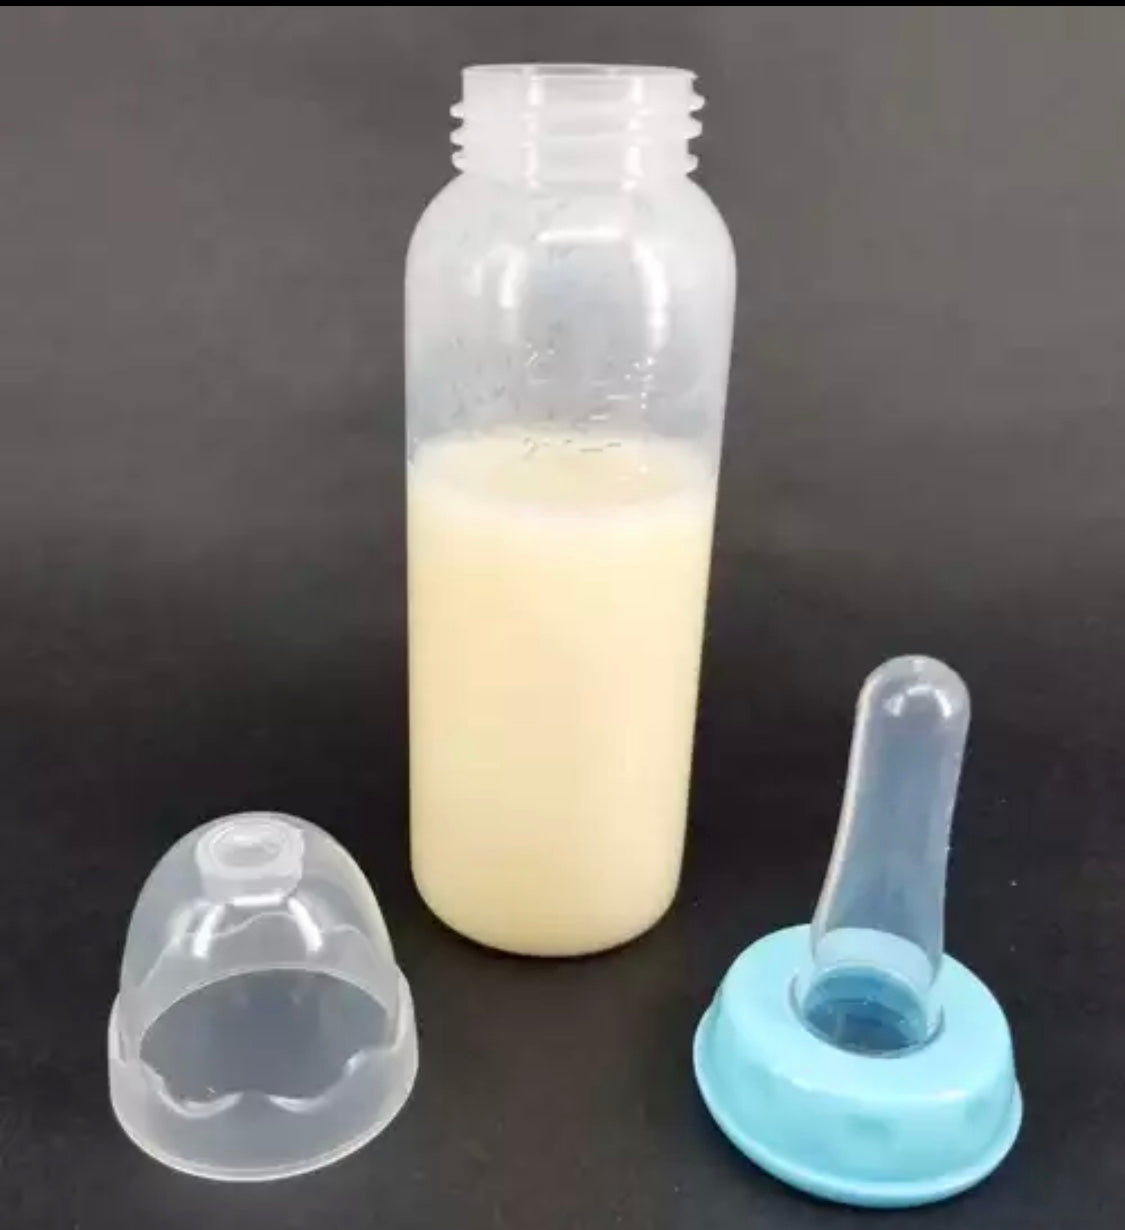 DDLGVERSE adult sized baby bottle with teat and blue cap